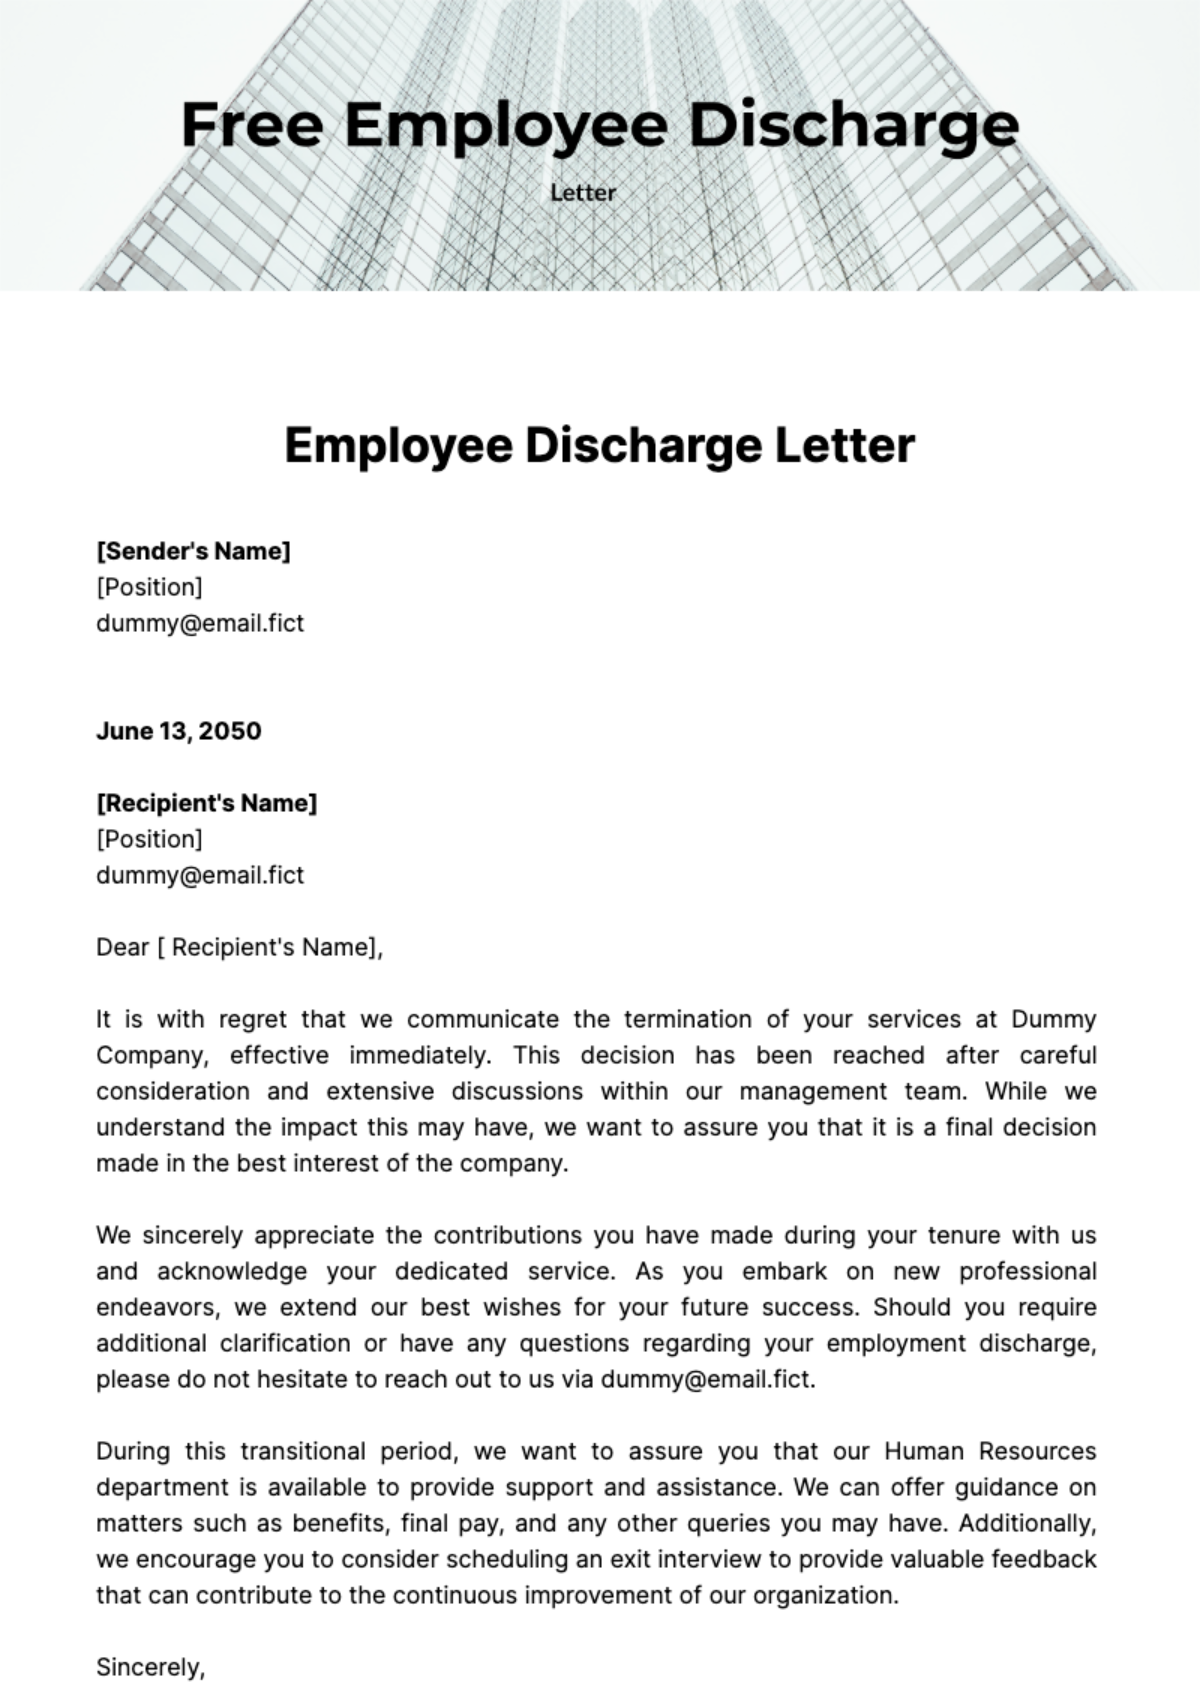 Free Employee Discharge Letter Template